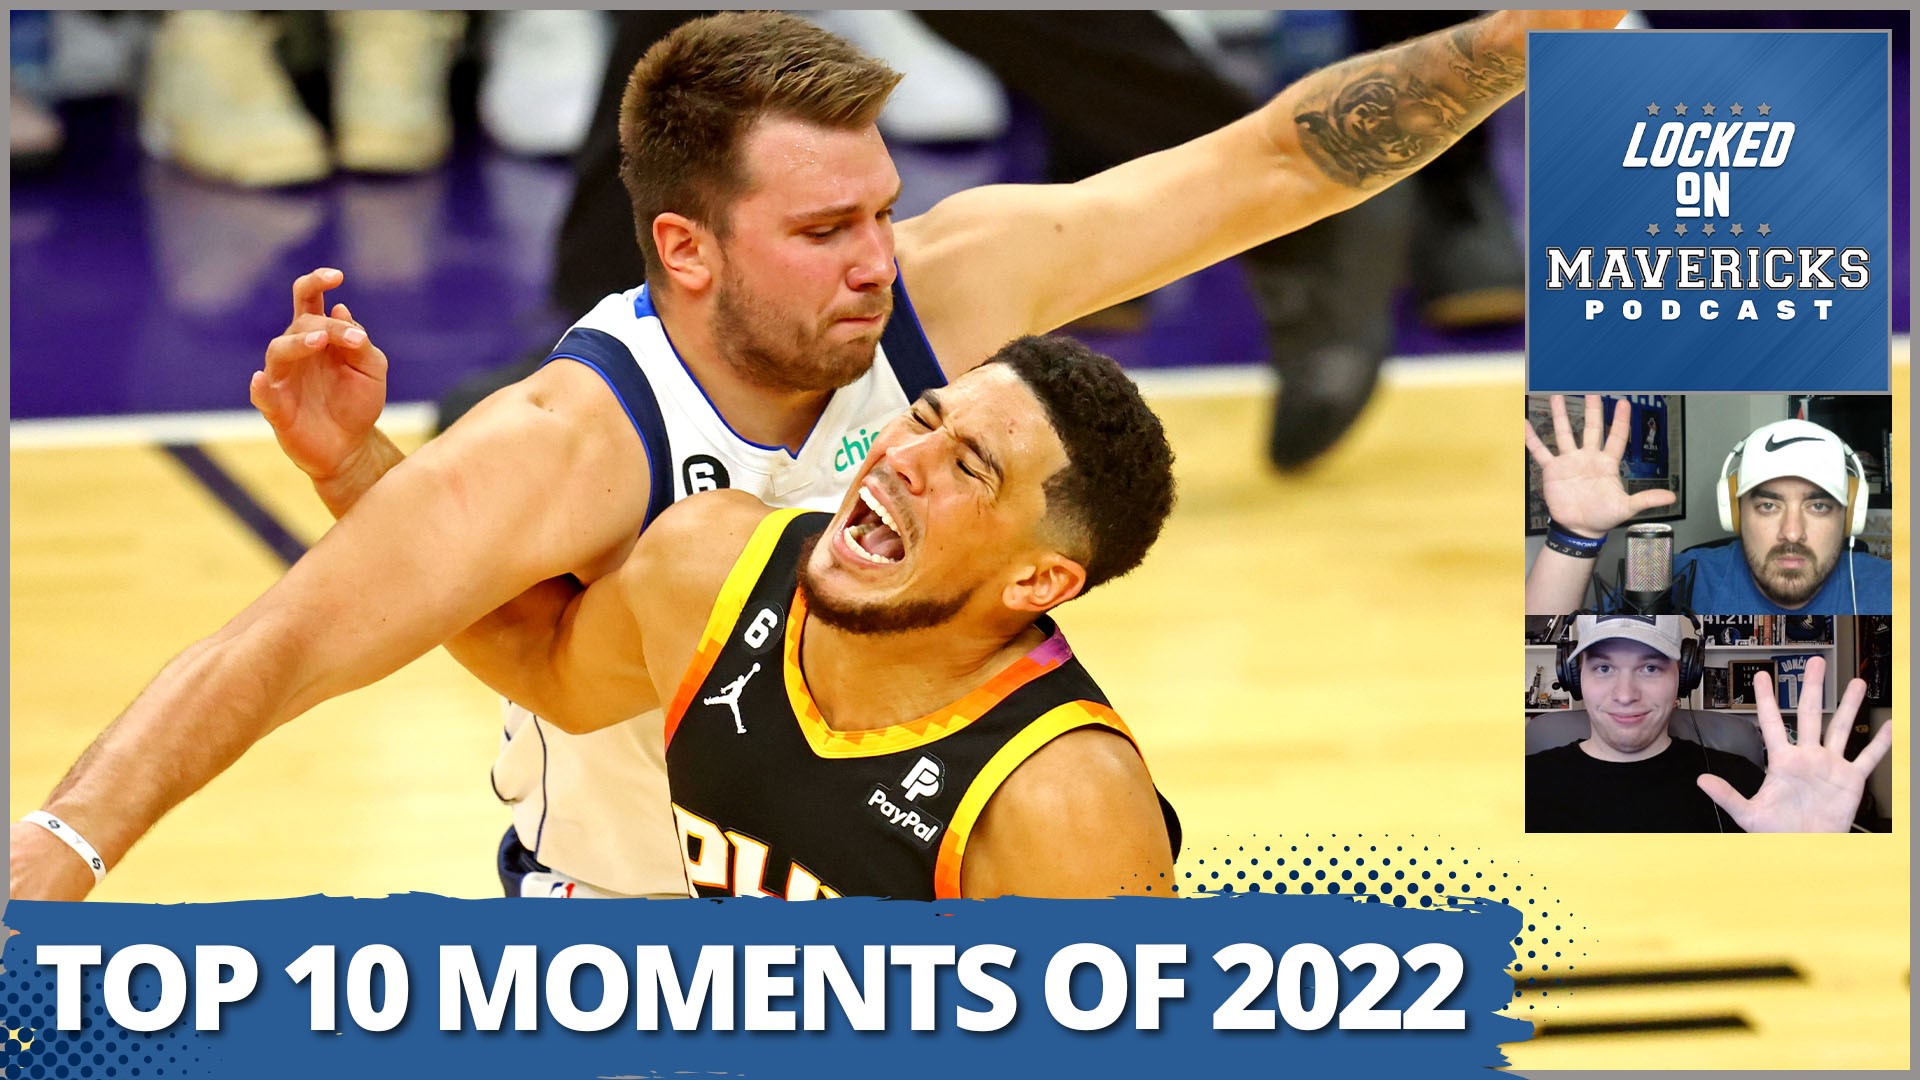 Nick Angstadt & Isaac Harris rank their Top 10 Best Moments of the 2022 Calendar Year for the Mavericks.